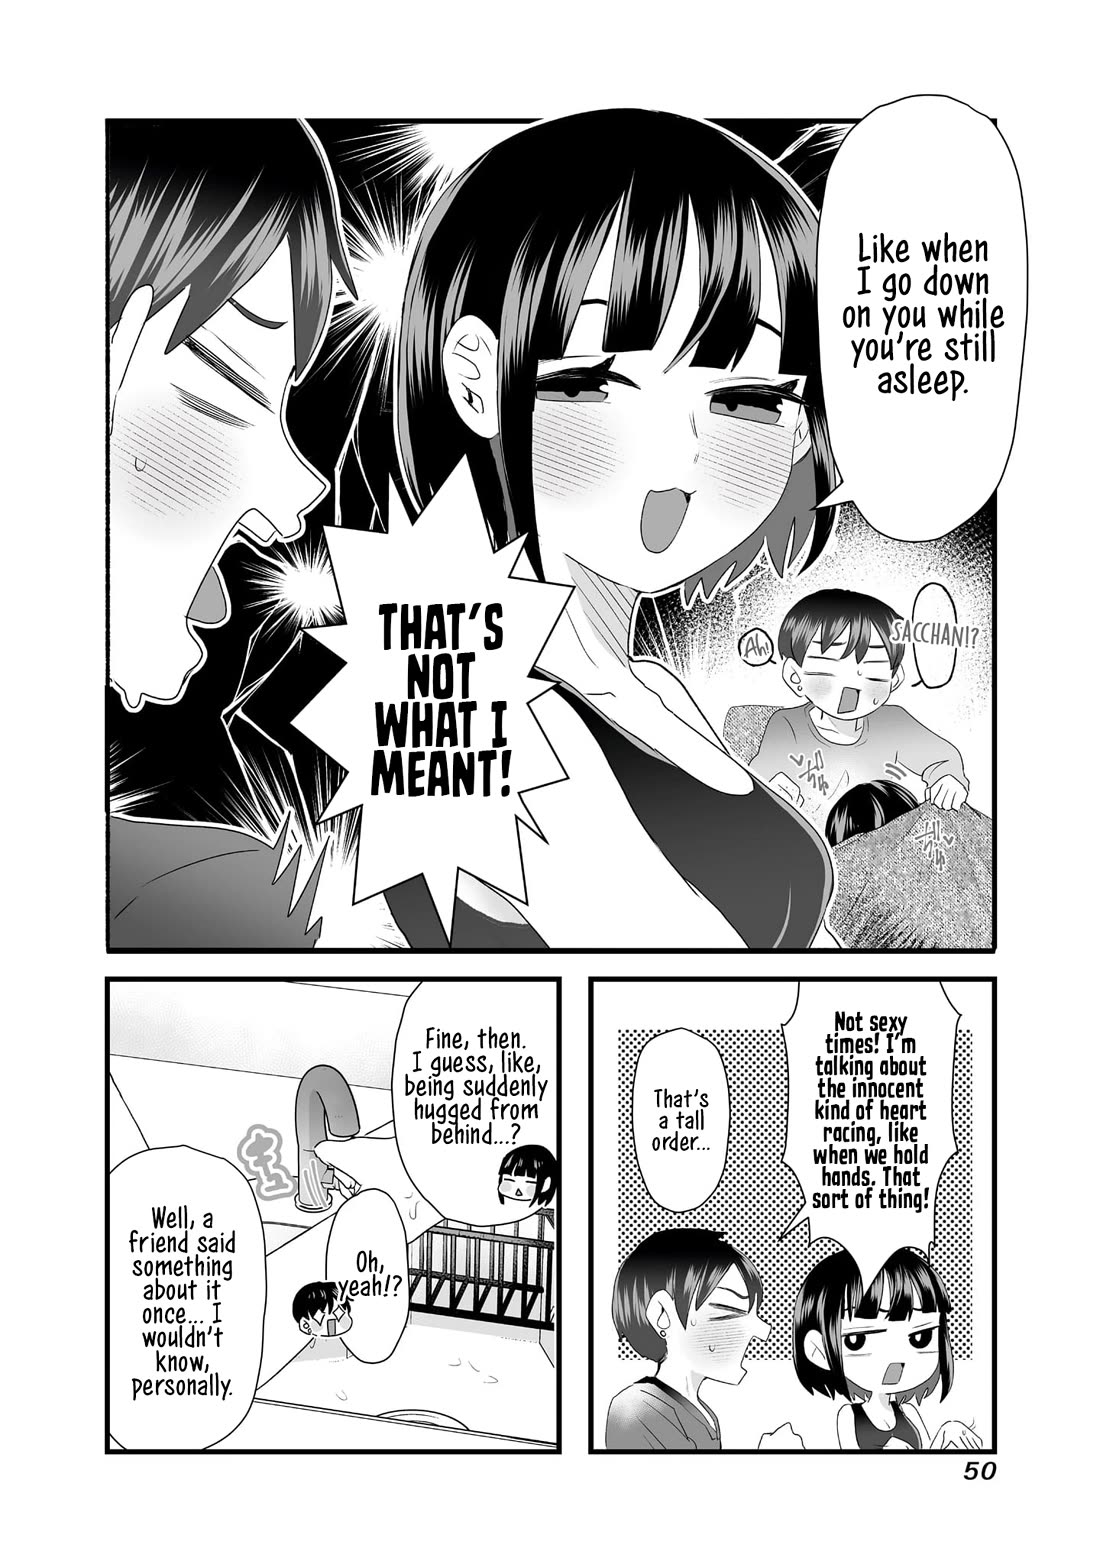 Sacchan and Ken-chan Are Going at it Again - chapter 6 - #2